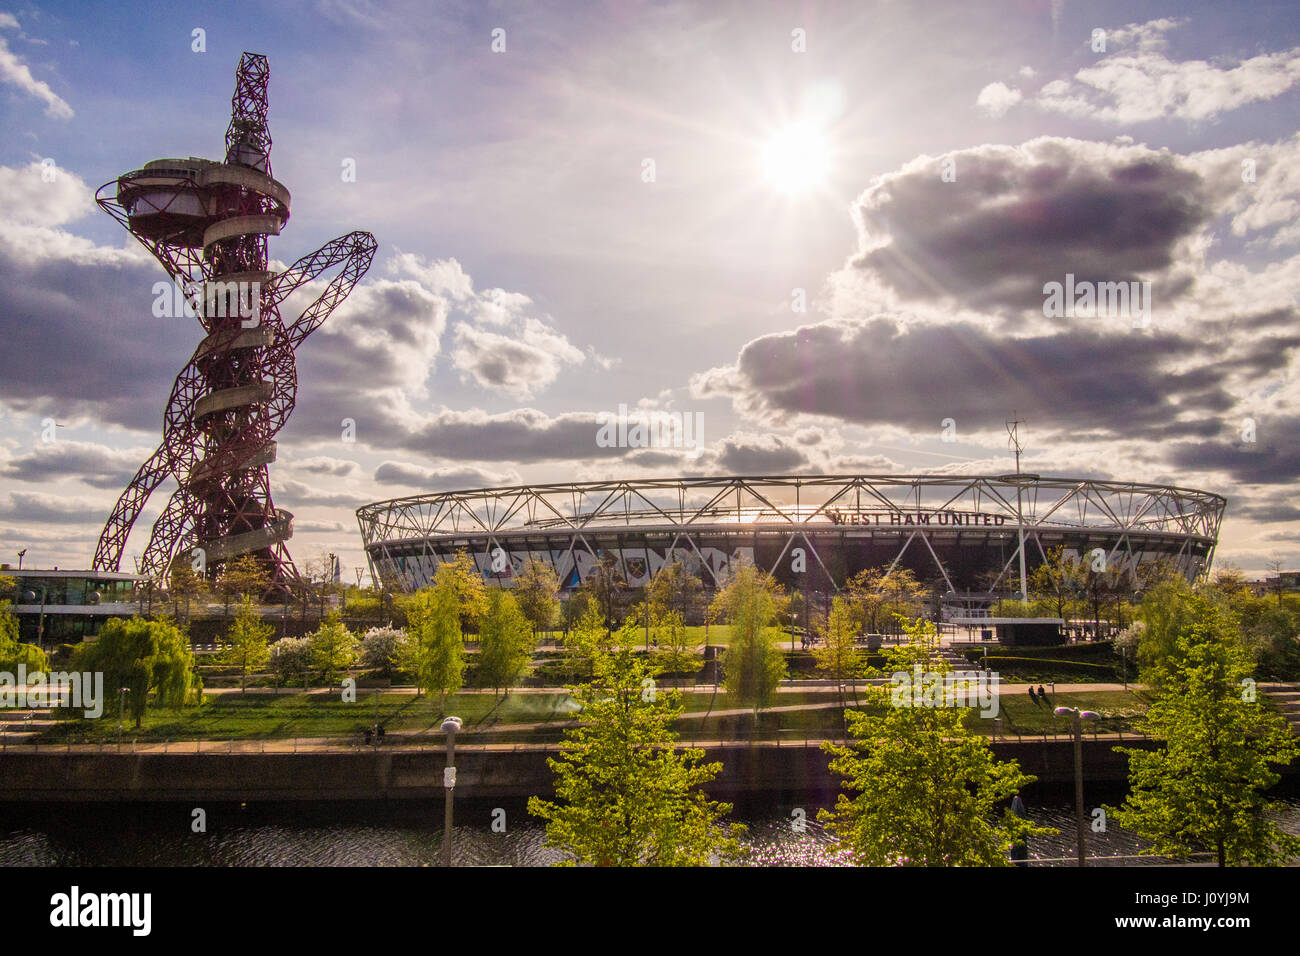 ArcelorMittal Orbit steel structure with tube slide next to the Olympic Stadium (Now West Ham's football ground), Olympic Park,  London Stock Photo